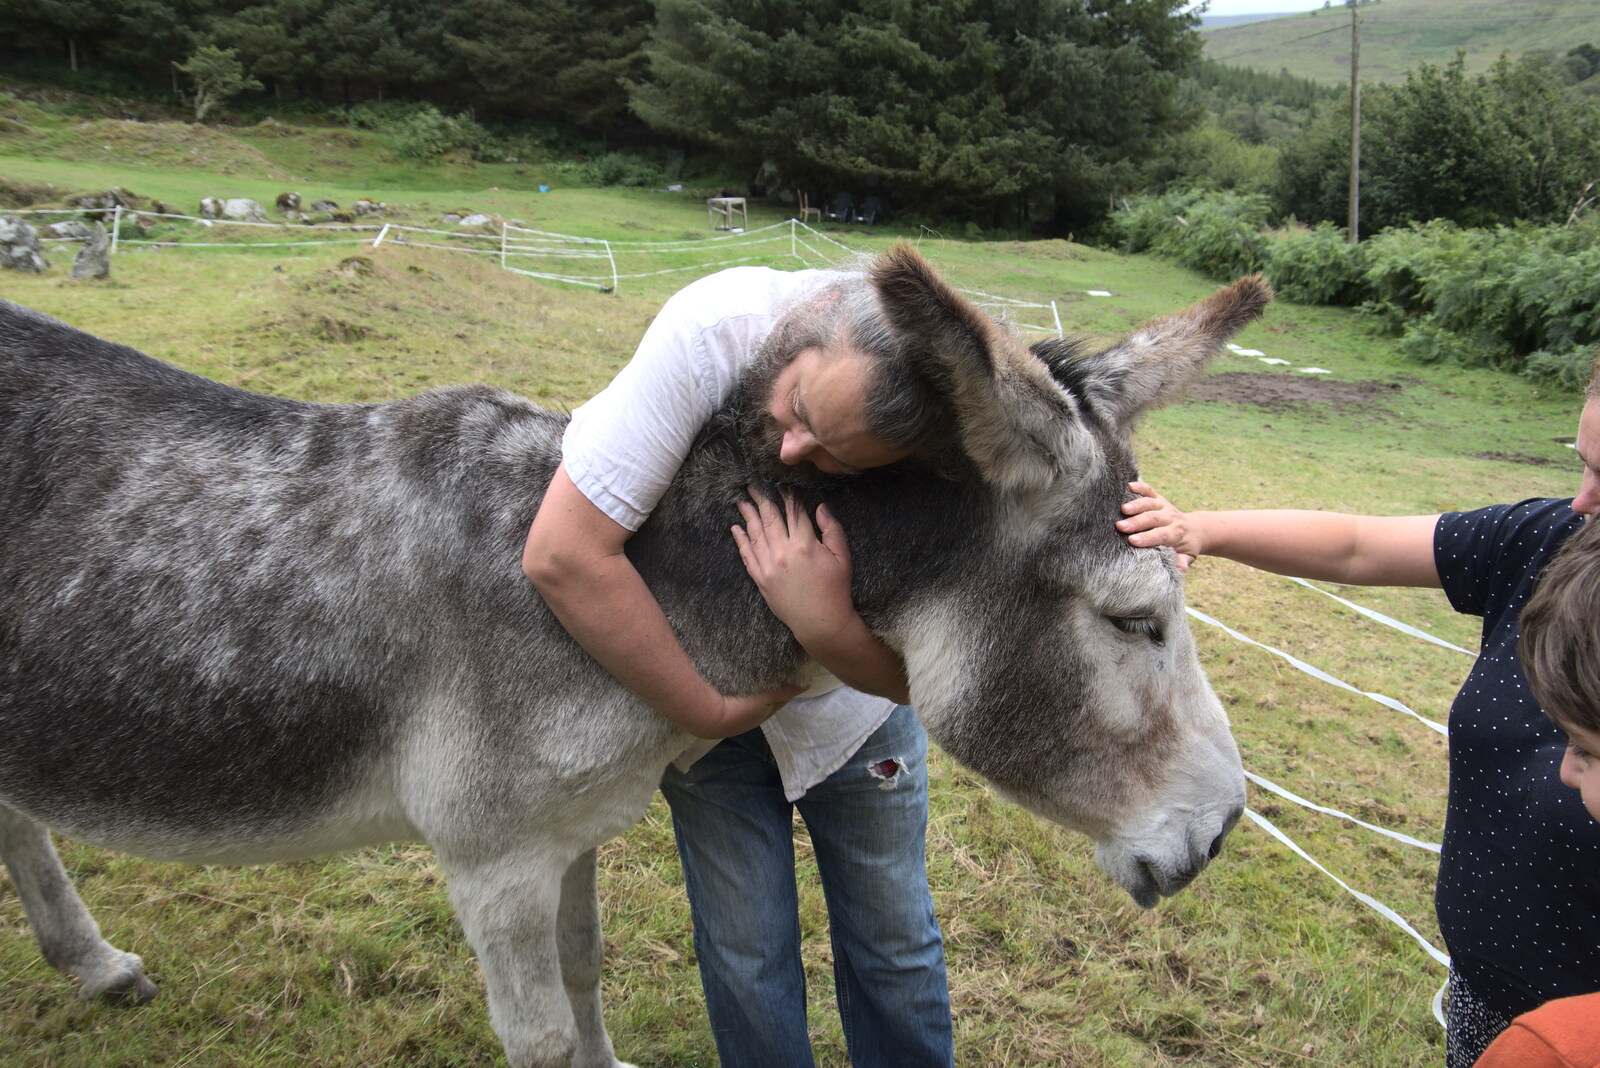 Noddy gives a donkey a hug from A Trip to Noddy's, and Dublin City Centre, Wicklow and Dublin, Ireland - 16th August 2021